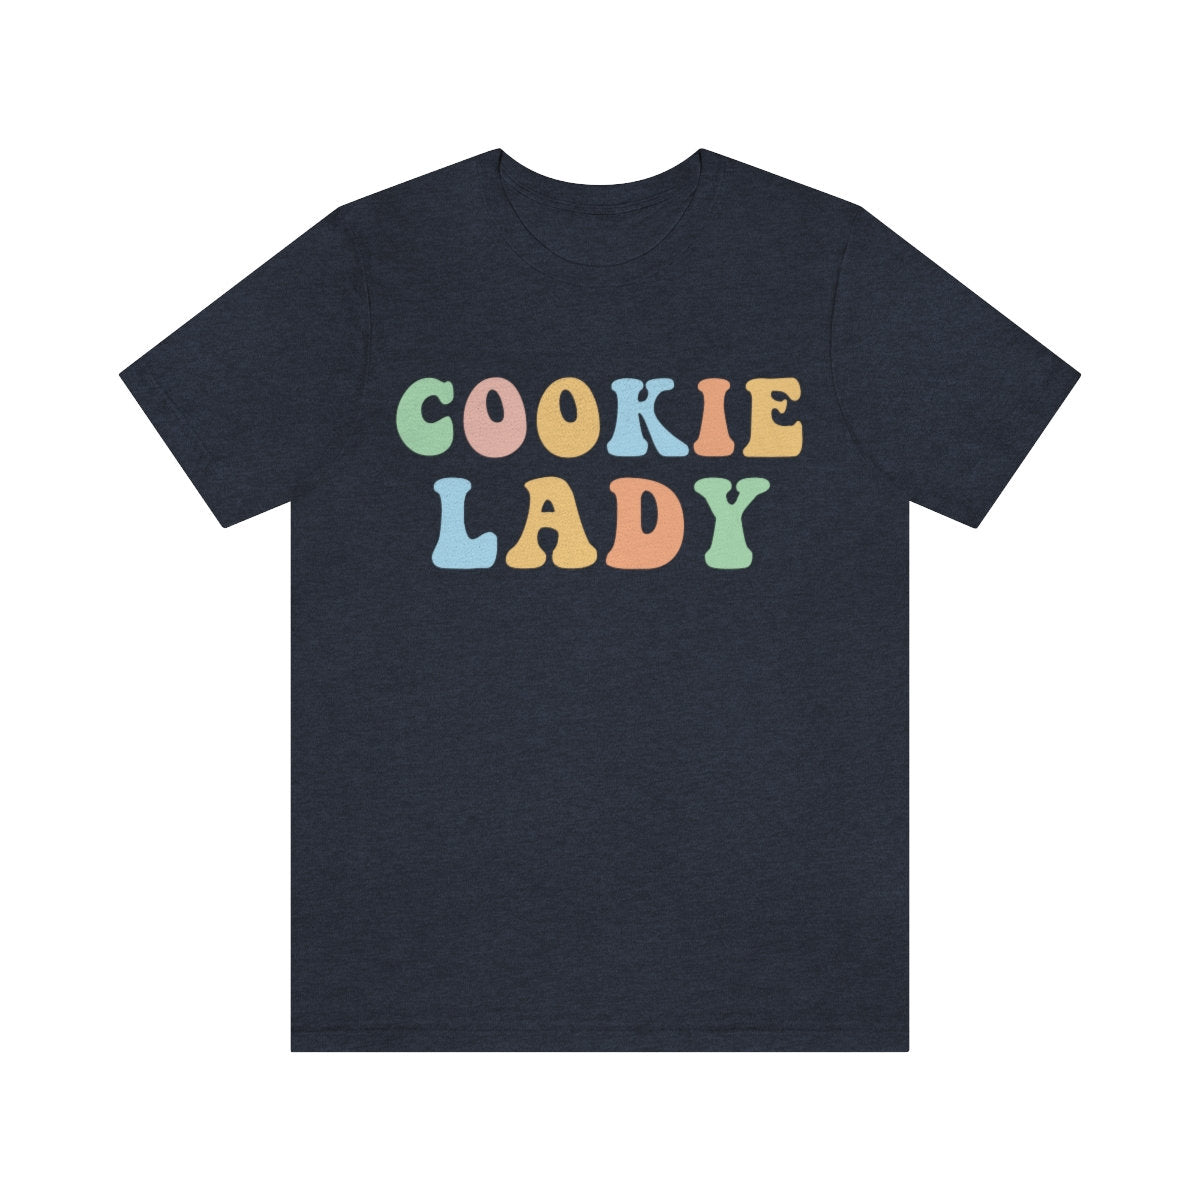 Cookie Lady Shirt, Bake Cookies Shirt, Cookie Lover Gifts - 37 Design Unit